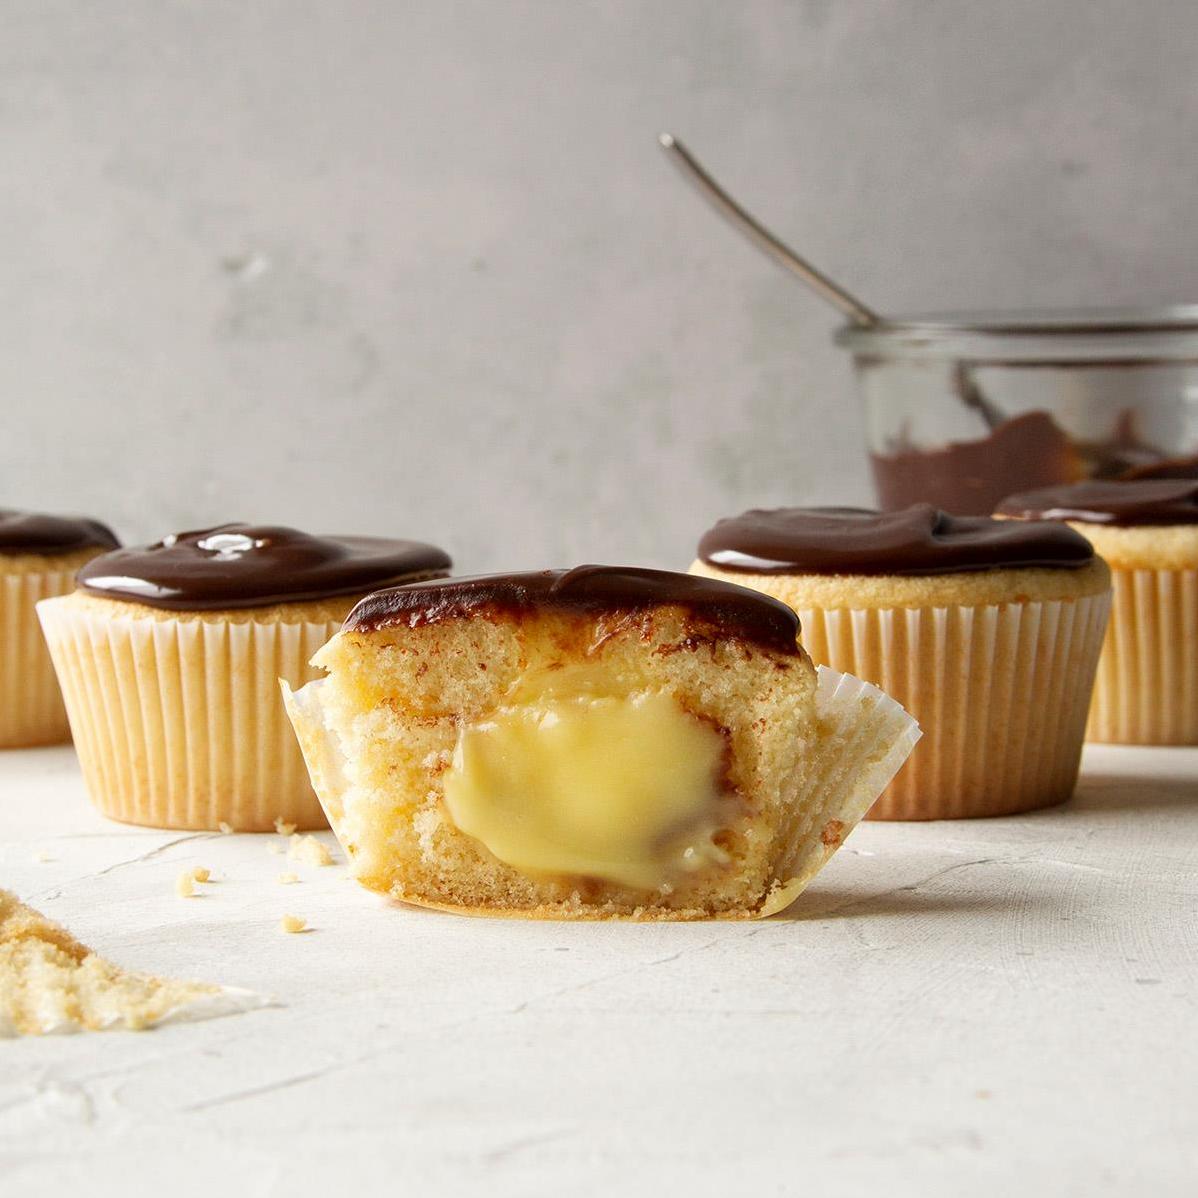  The perfect blend of coffee and cake: Boston Cream Cupcakes with an Espresso Twist!